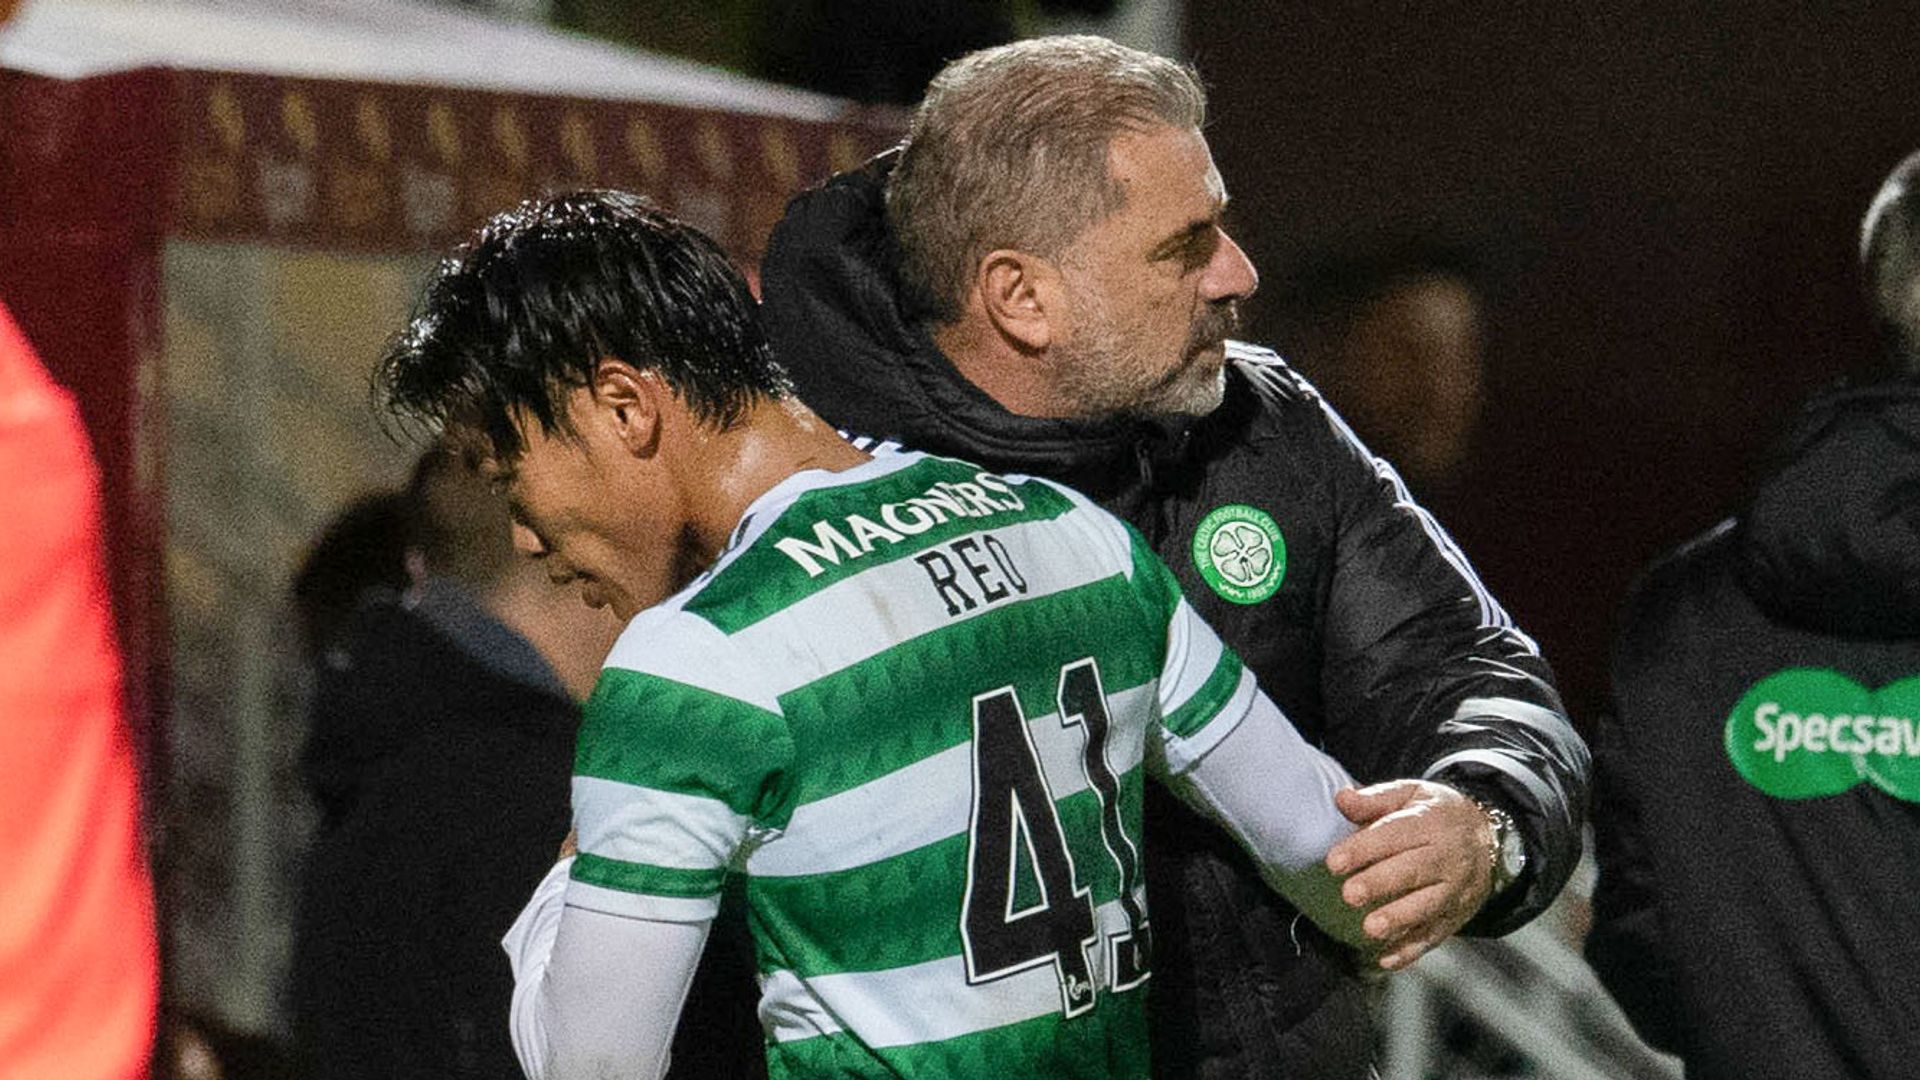 Hatate to miss Old Firm | Postecoglou: Celtic have enough depth